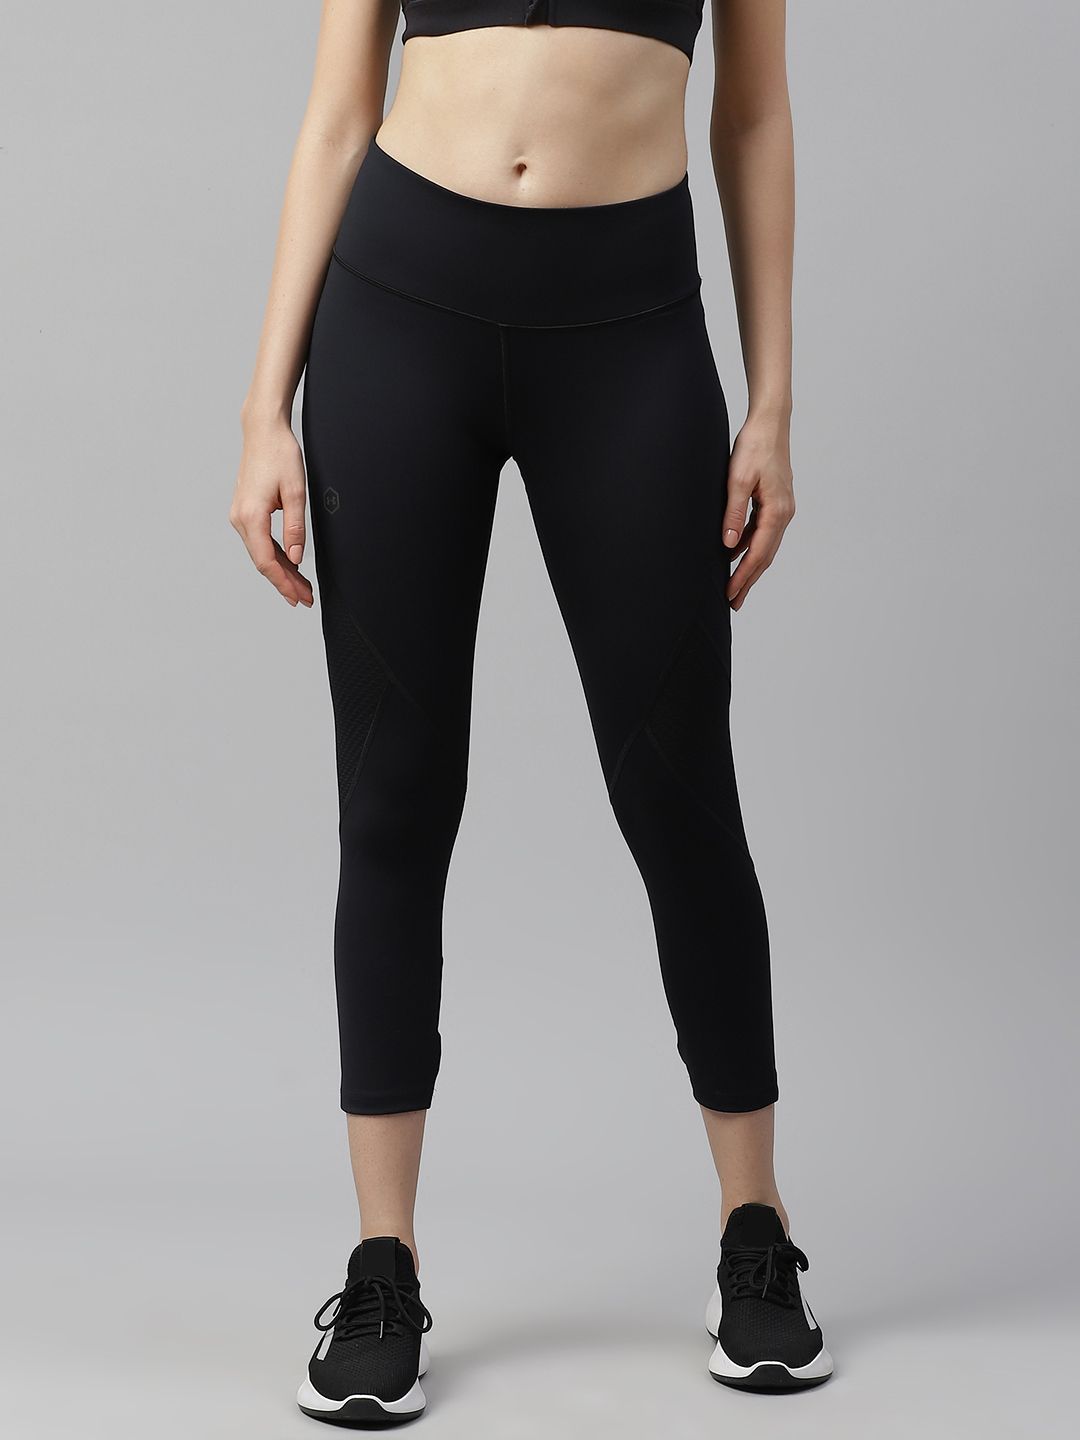 UNDER ARMOUR Women Black Solid Rush Cropped Tights Price in India